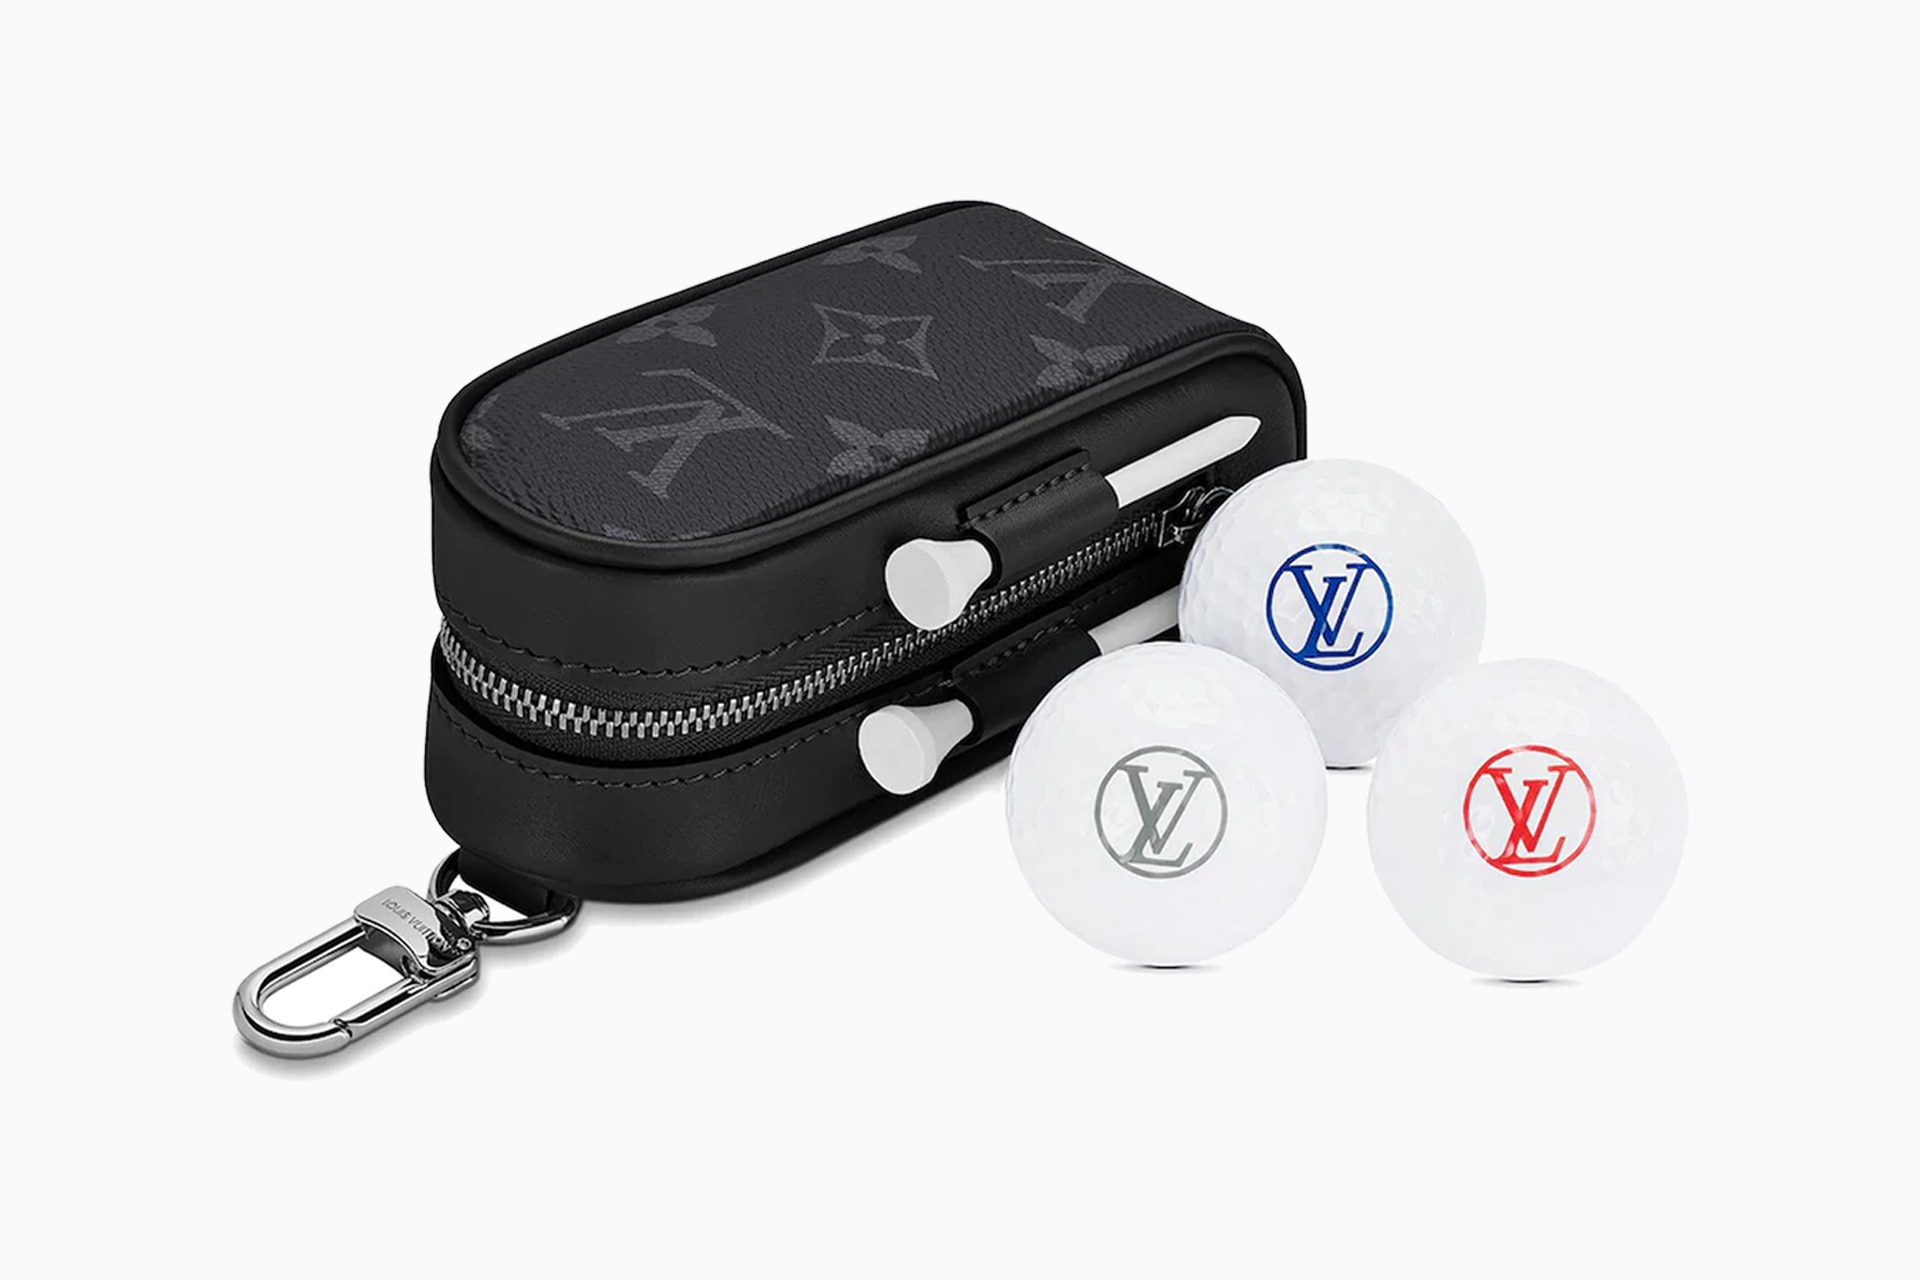 Louis Vuitton Just Dropped A $1,200 Set Of Golf Accessories - GQ